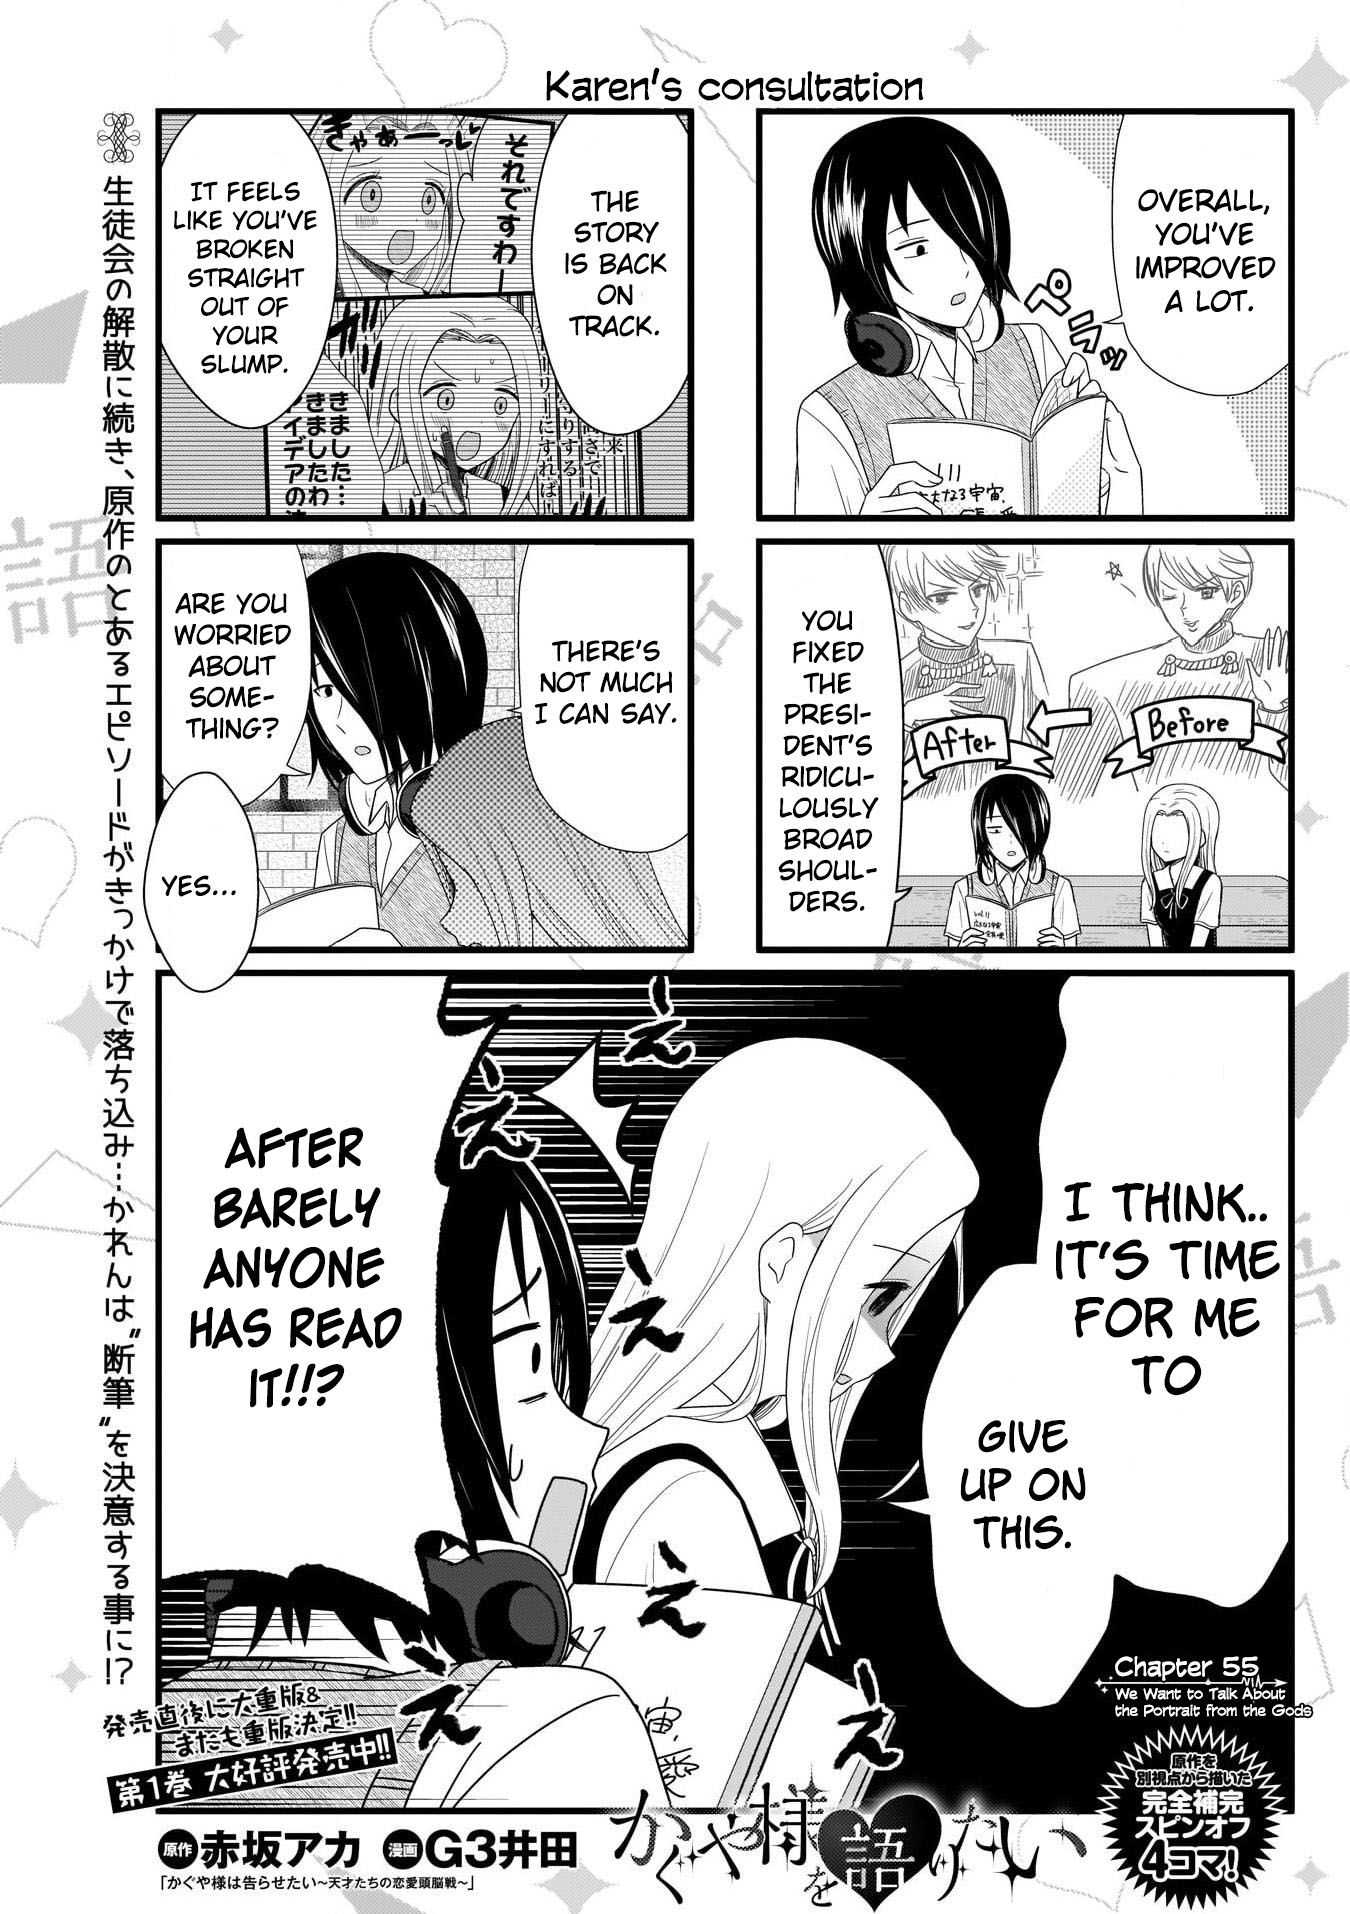 We Want To Talk About Kaguya 55 1